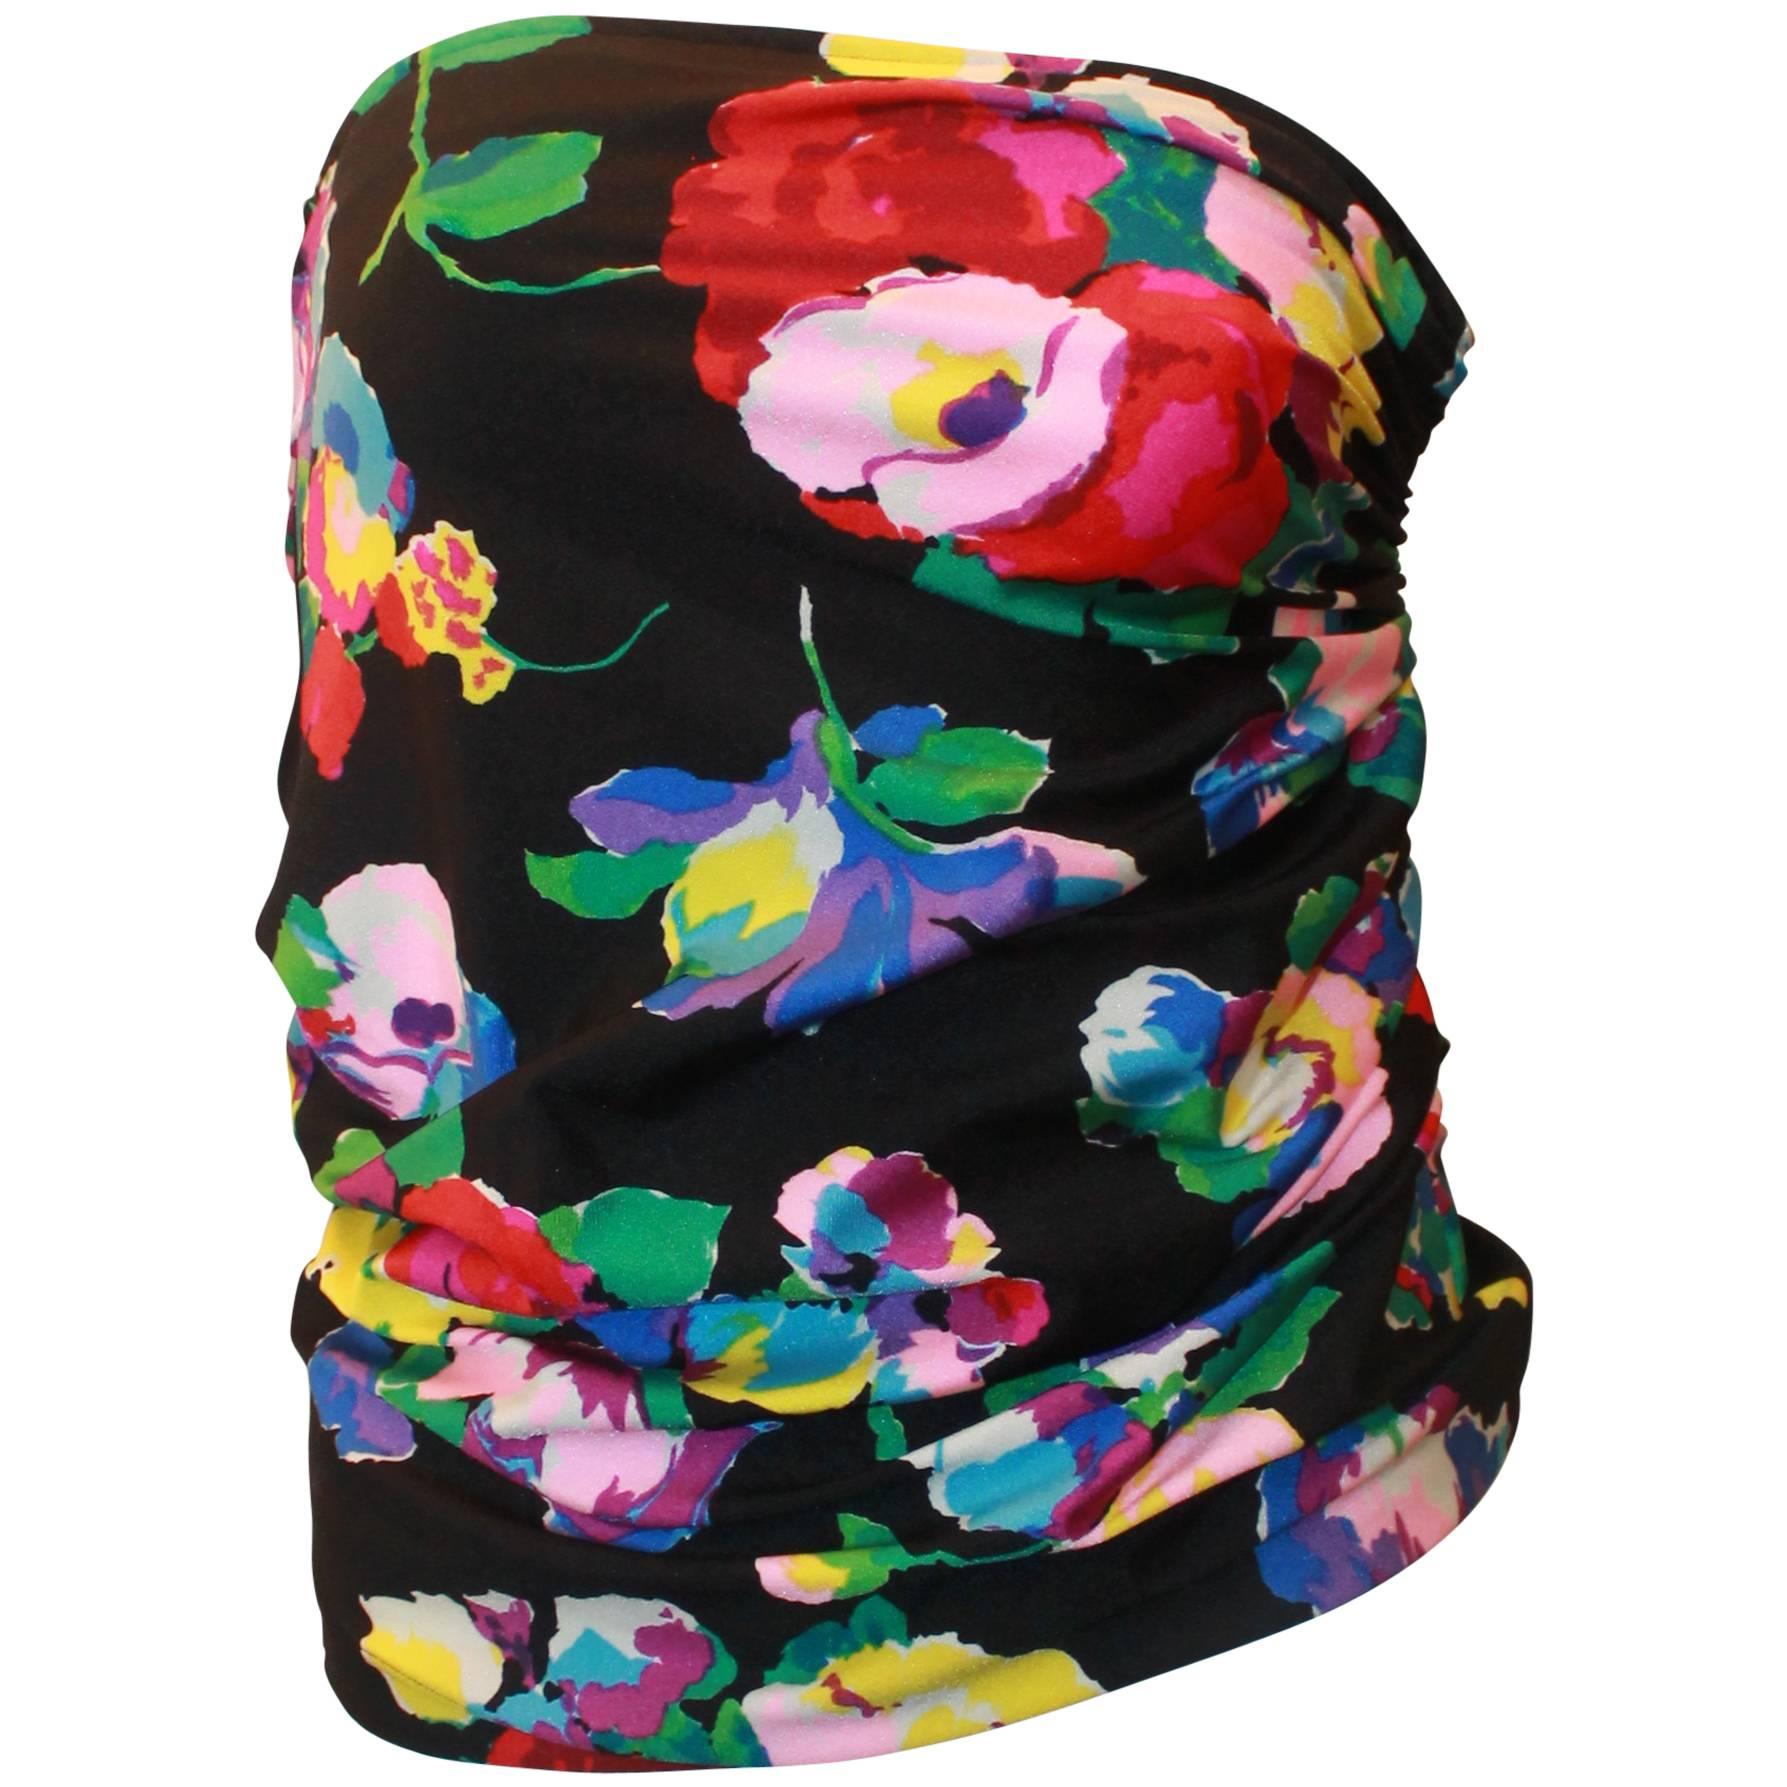 Emanuel Ungaro Black Strapless Ruched Top with Multicolor Flowers - M